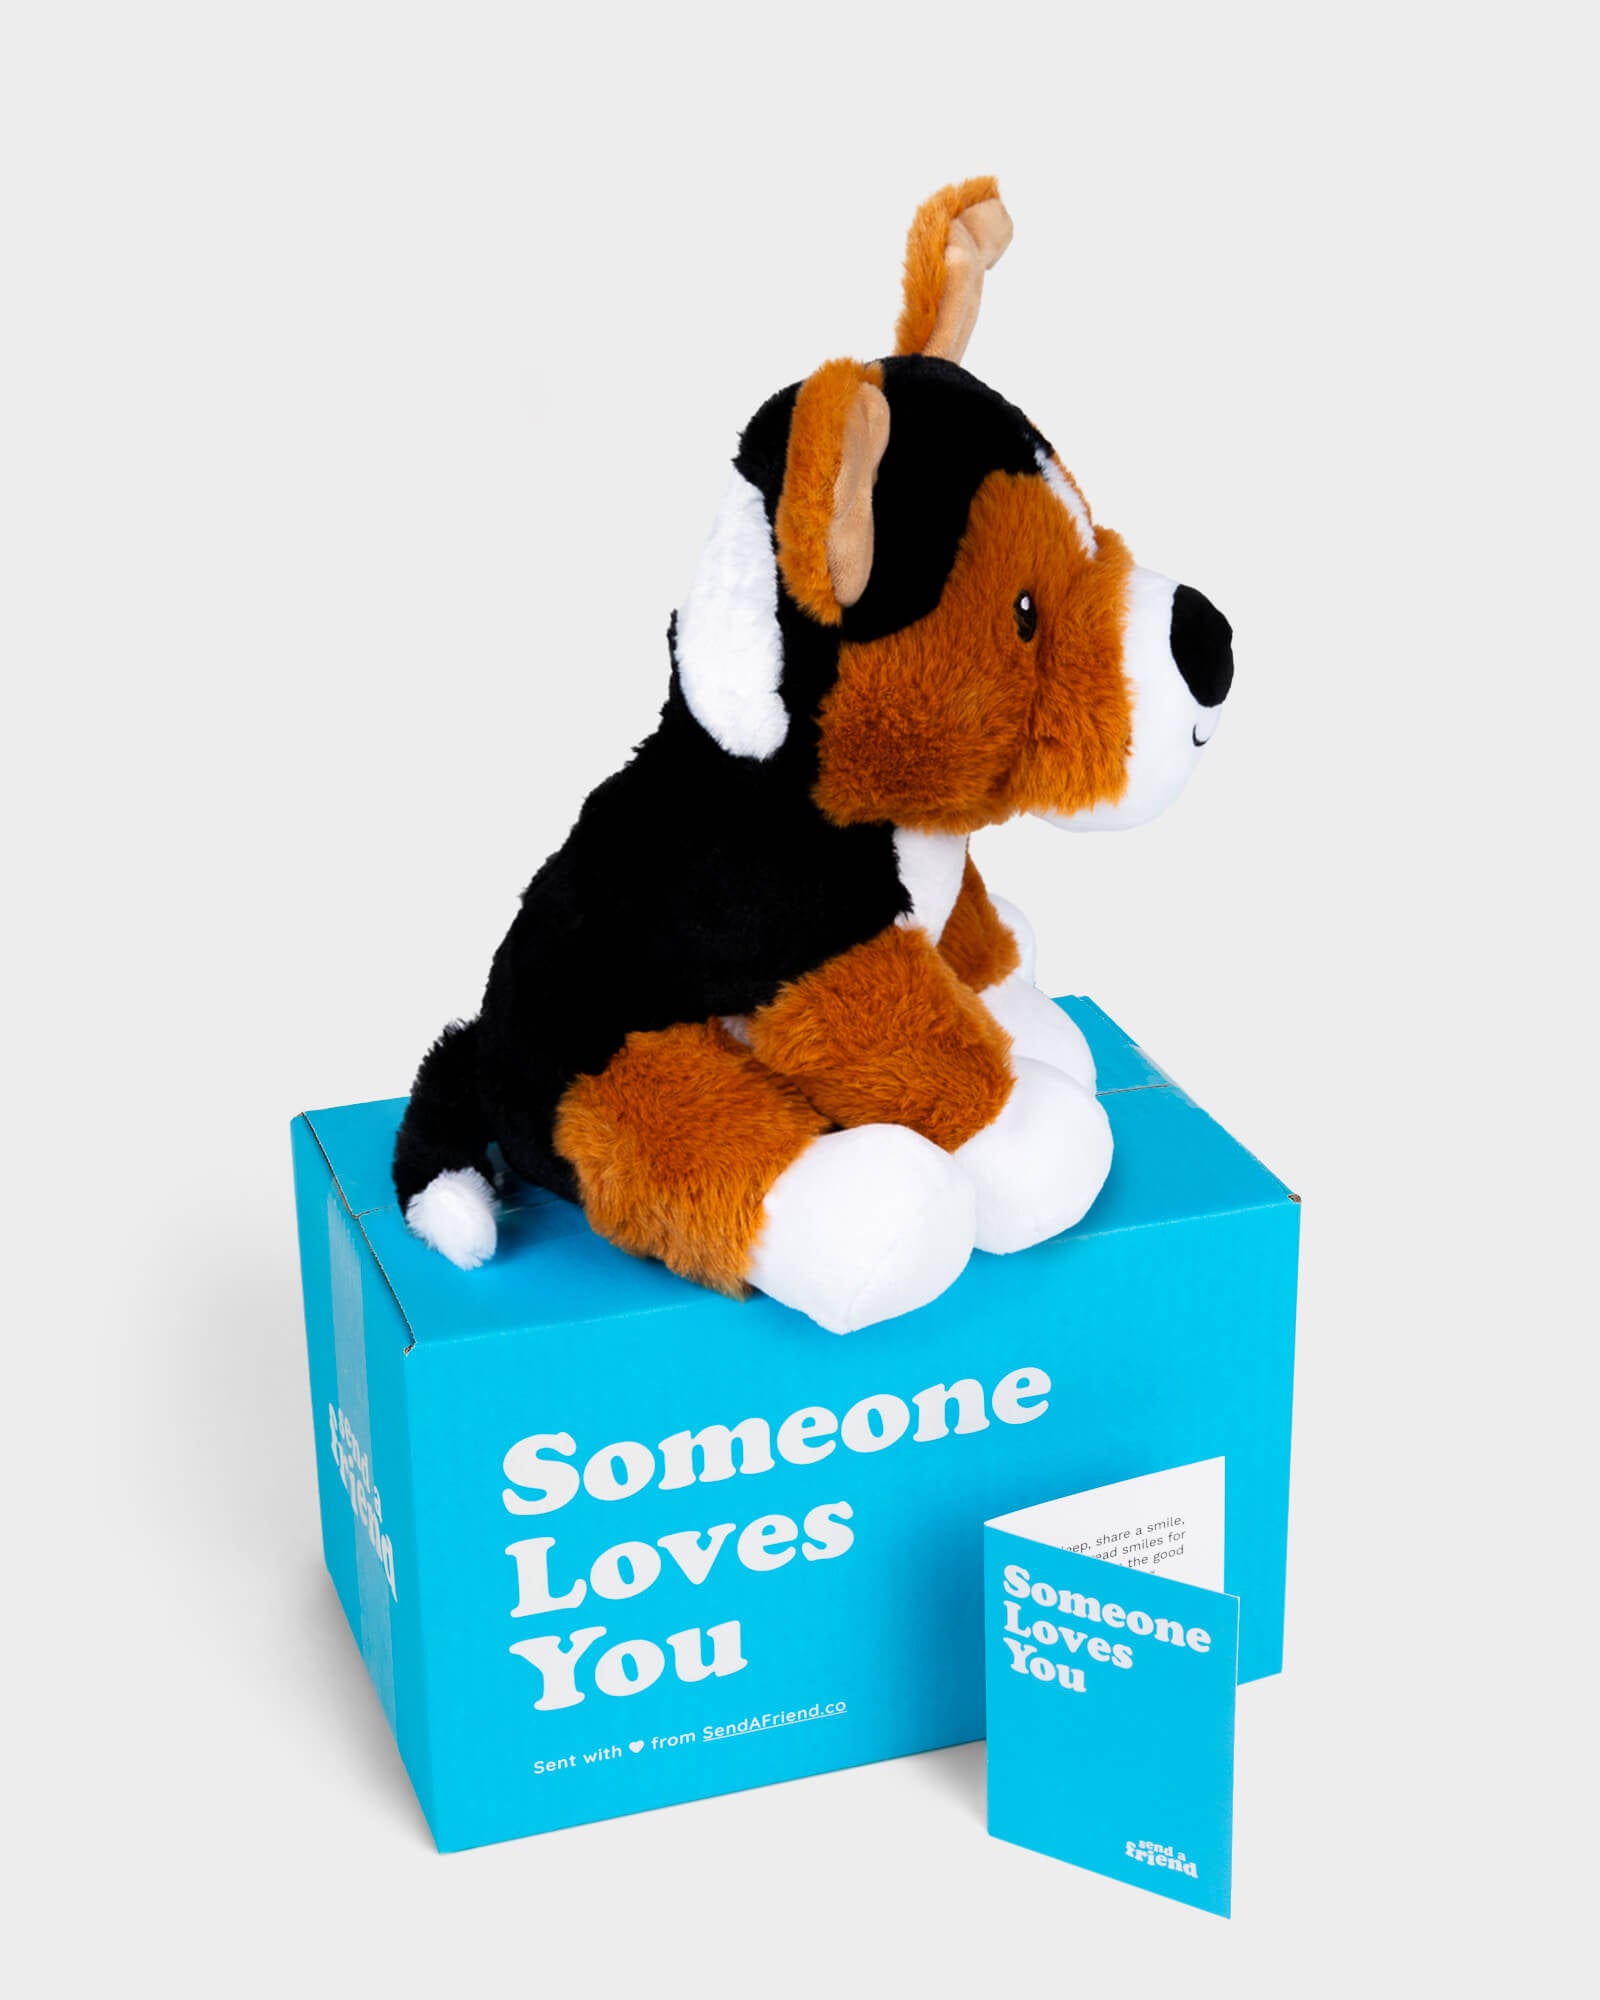 Photo of side view orange, black, and white Roscoe the Rescue plushie with Someone Loves You box and notecard